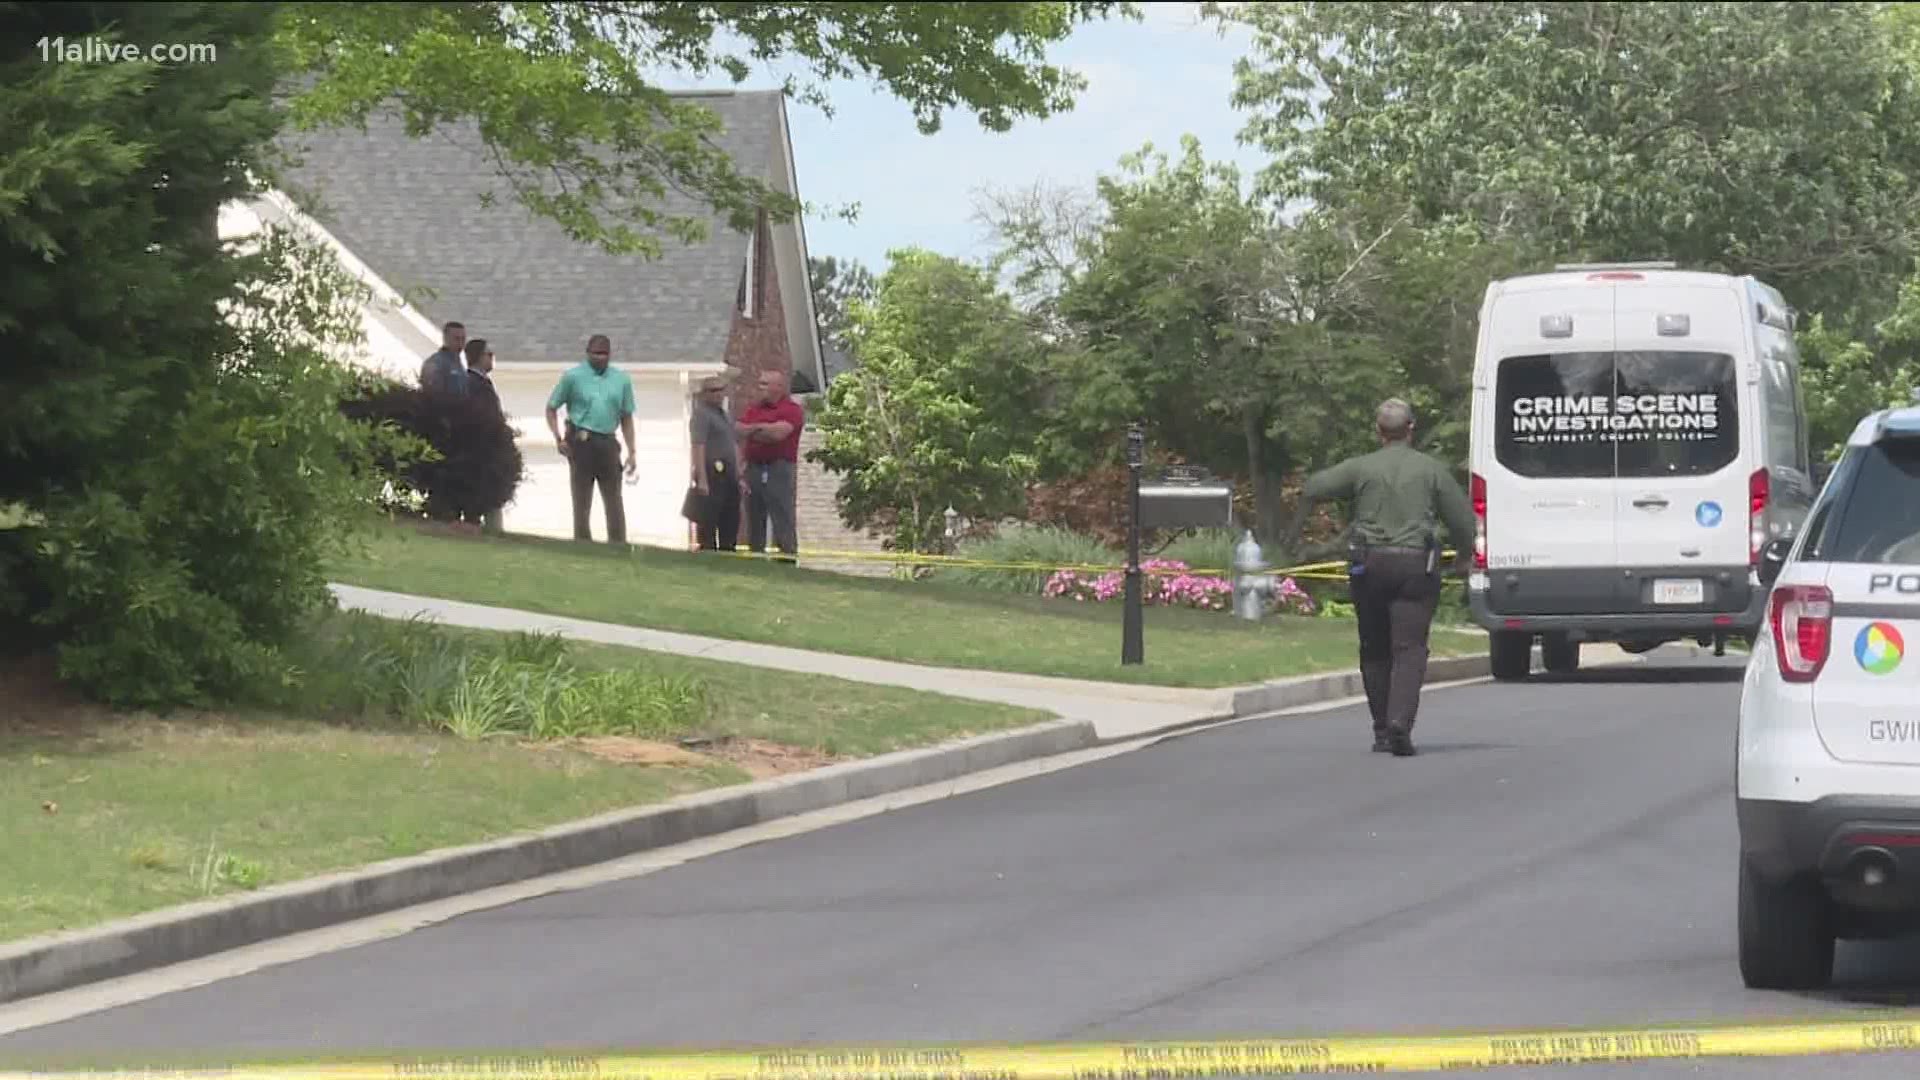 Authorities are investigating an apparent murder-suicide that happened inside a home in a Lawrenceville-area neighborhood Wednesday afternoon.